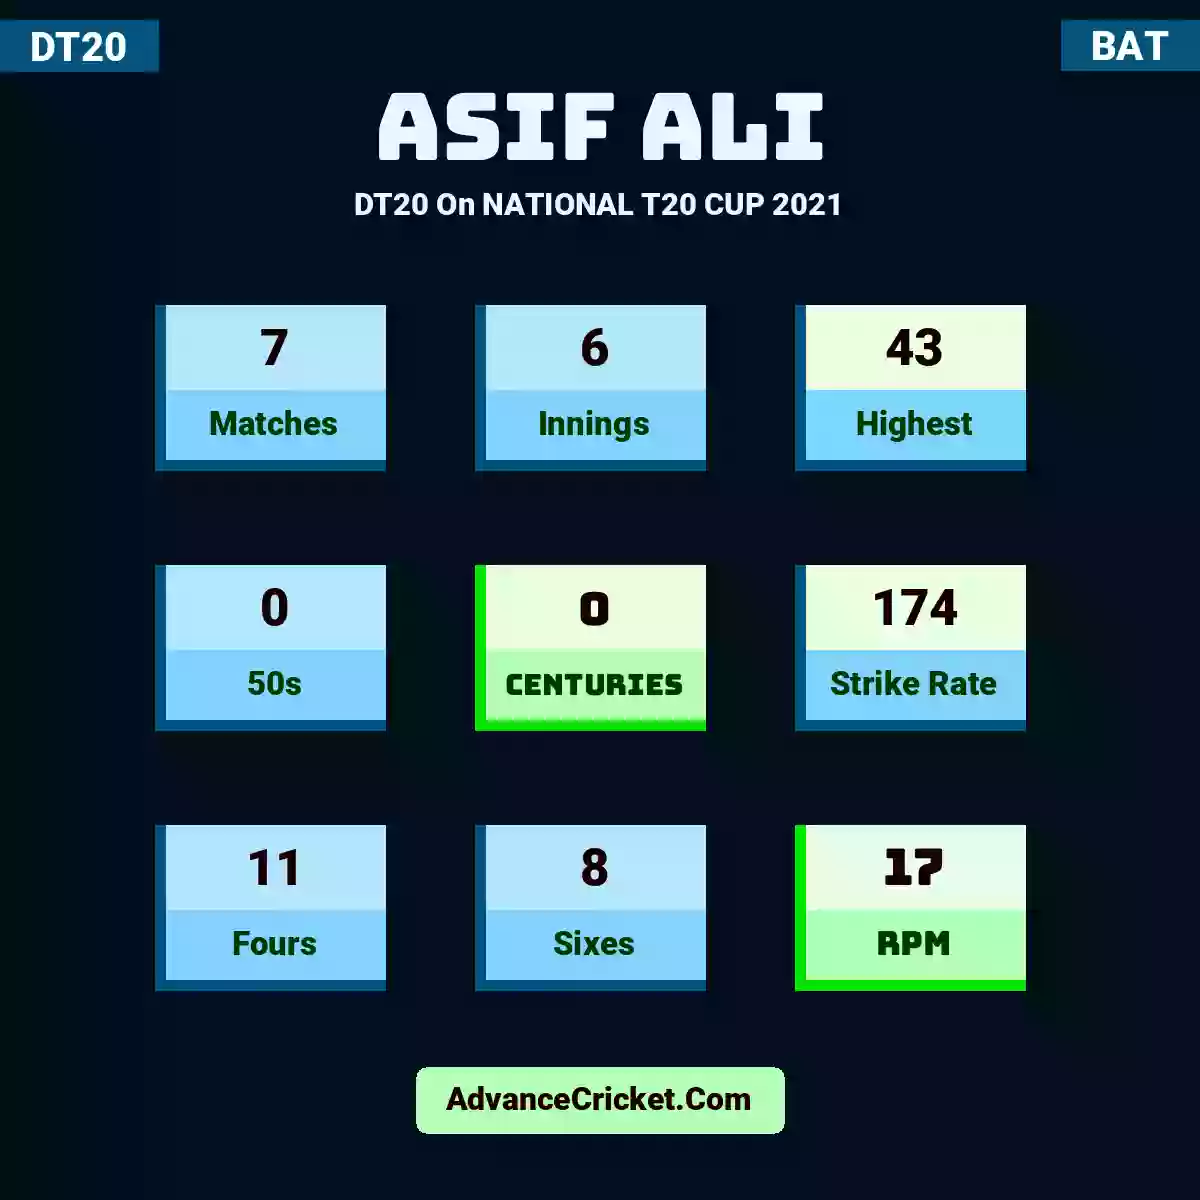 Asif Ali DT20  On NATIONAL T20 CUP 2021, Asif Ali played 7 matches, scored 43 runs as highest, 0 half-centuries, and 0 centuries, with a strike rate of 174. A.Ali hit 11 fours and 8 sixes, with an RPM of 17.